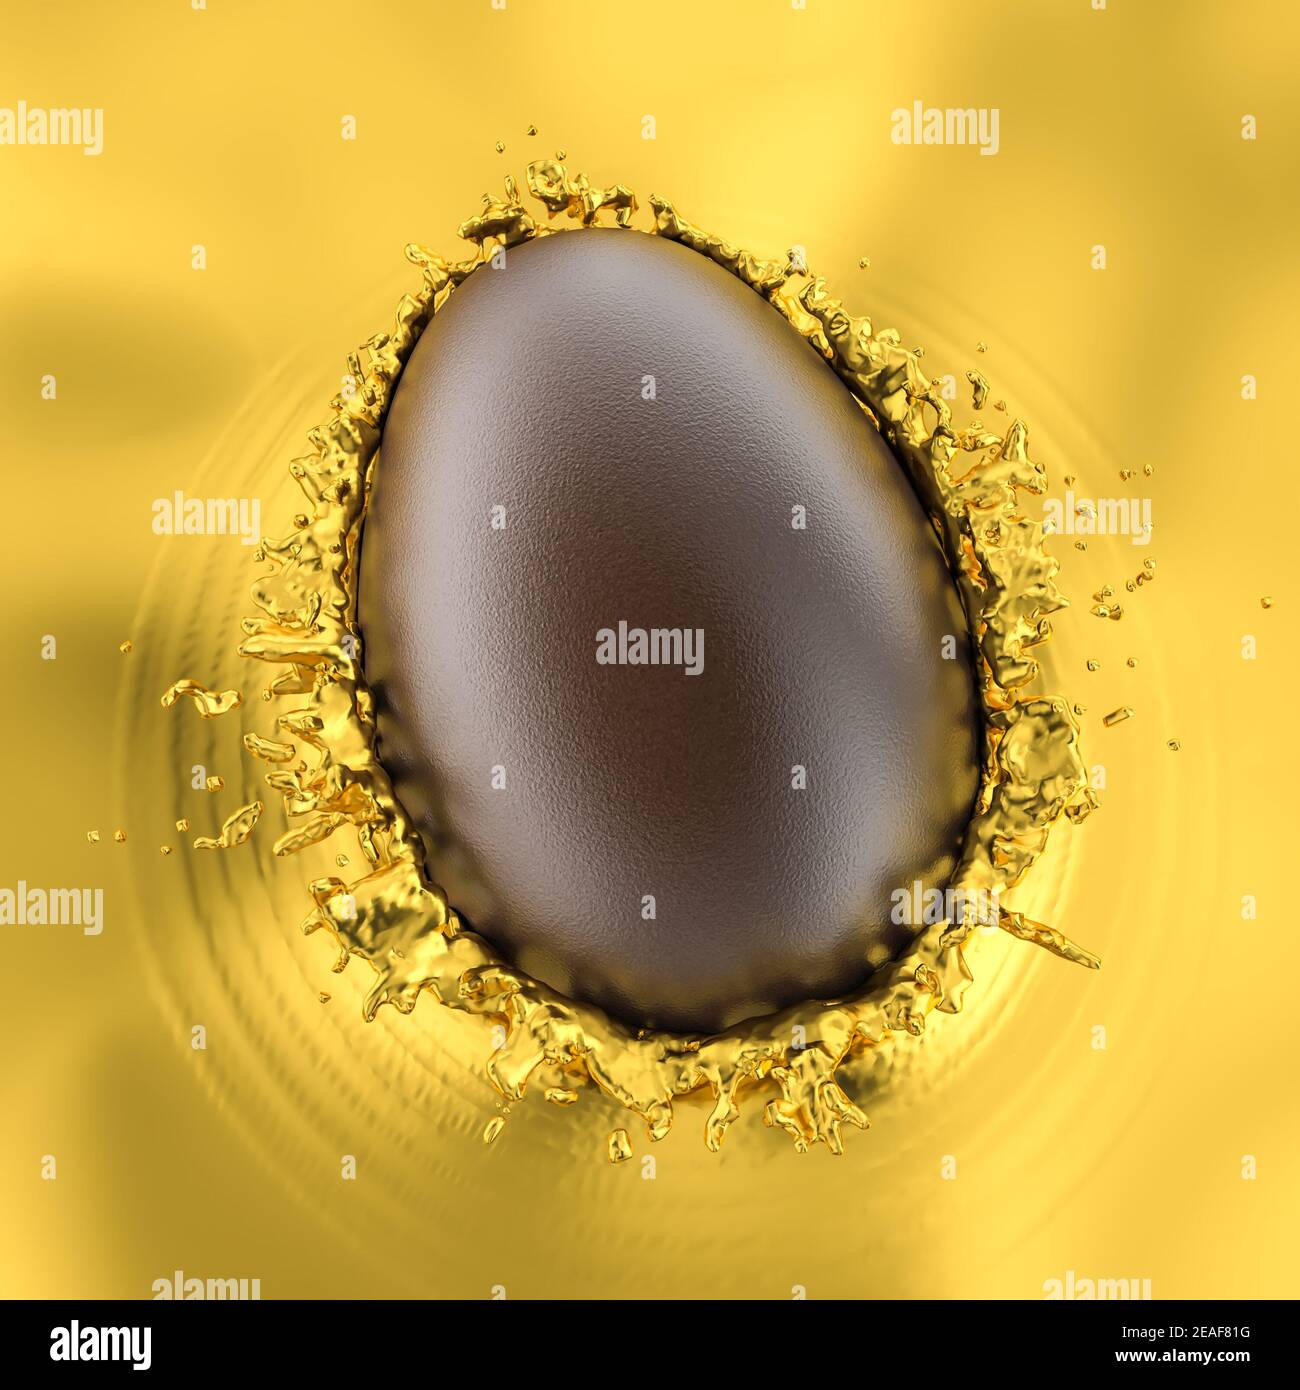 chocolate egg falling and impacting liquid gold. 3d render Stock Photo